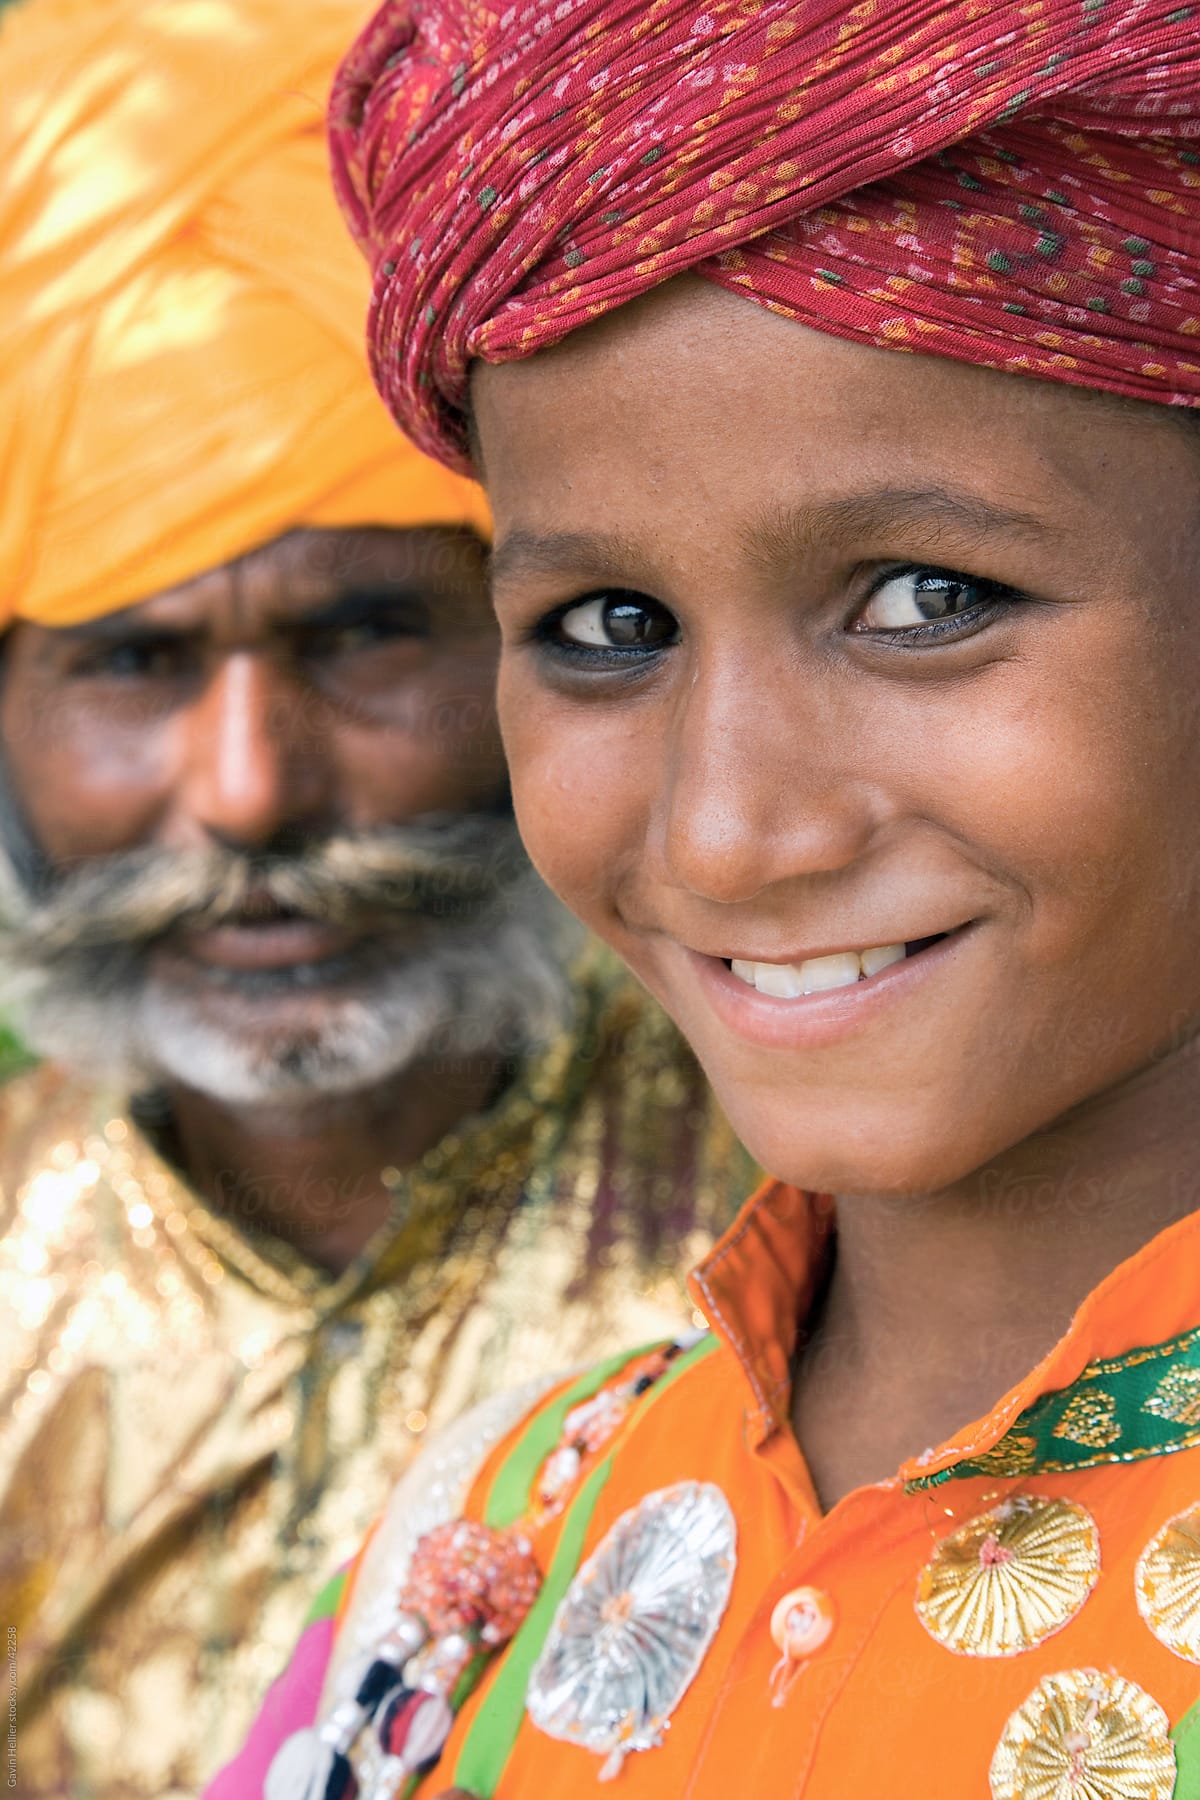 India, Rajasthan, Jaipur, portrait of a local boy and his father wearing colourful turbans